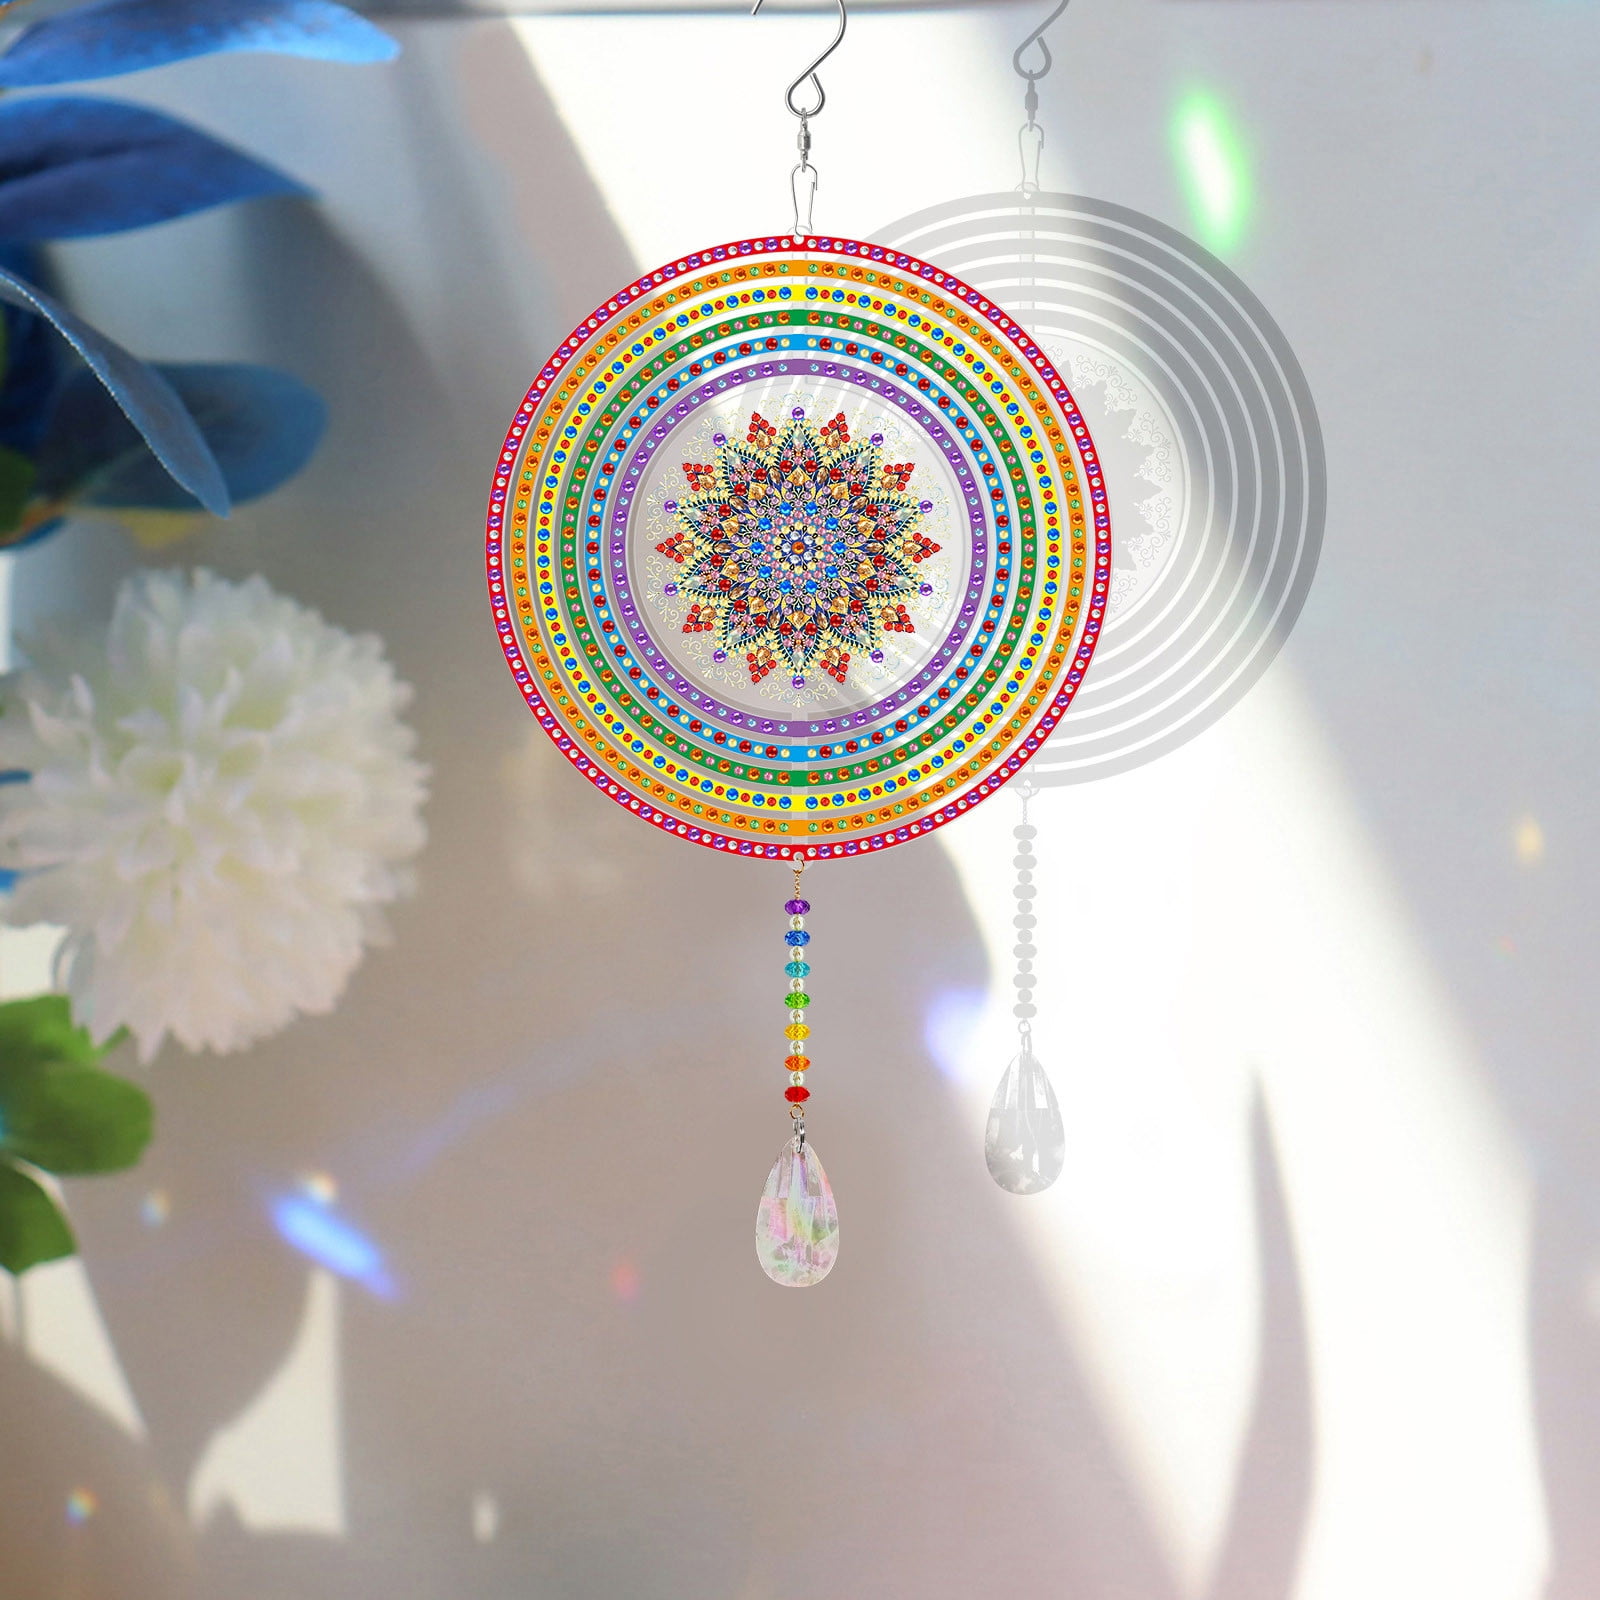 TERGAYEE Diamond Painting Suncatcher,Double Sided 3D Wind Chime Diamond  Painting Kits for Adults Kids,for Garden Window Home DIY Kits 